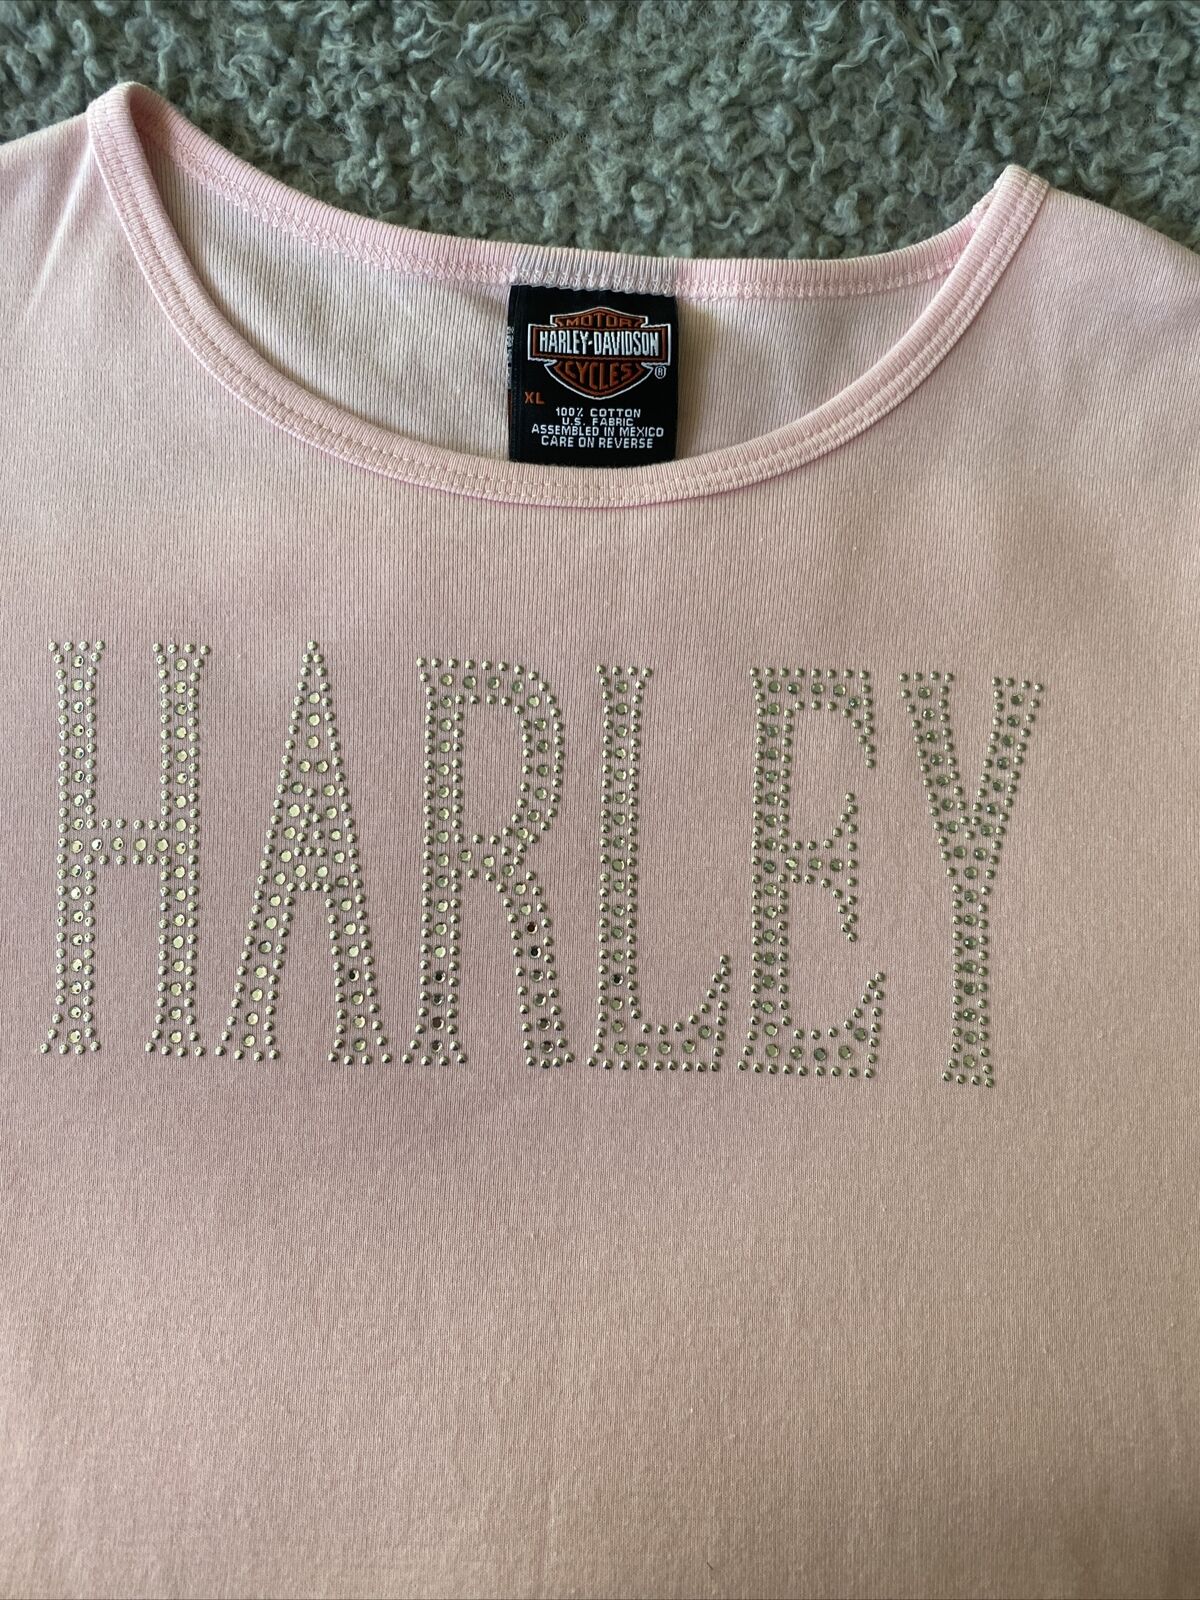 Harley Davidson Ladies XL Pink Rhinestone Accented T-Shirt from Fort Lauderdale